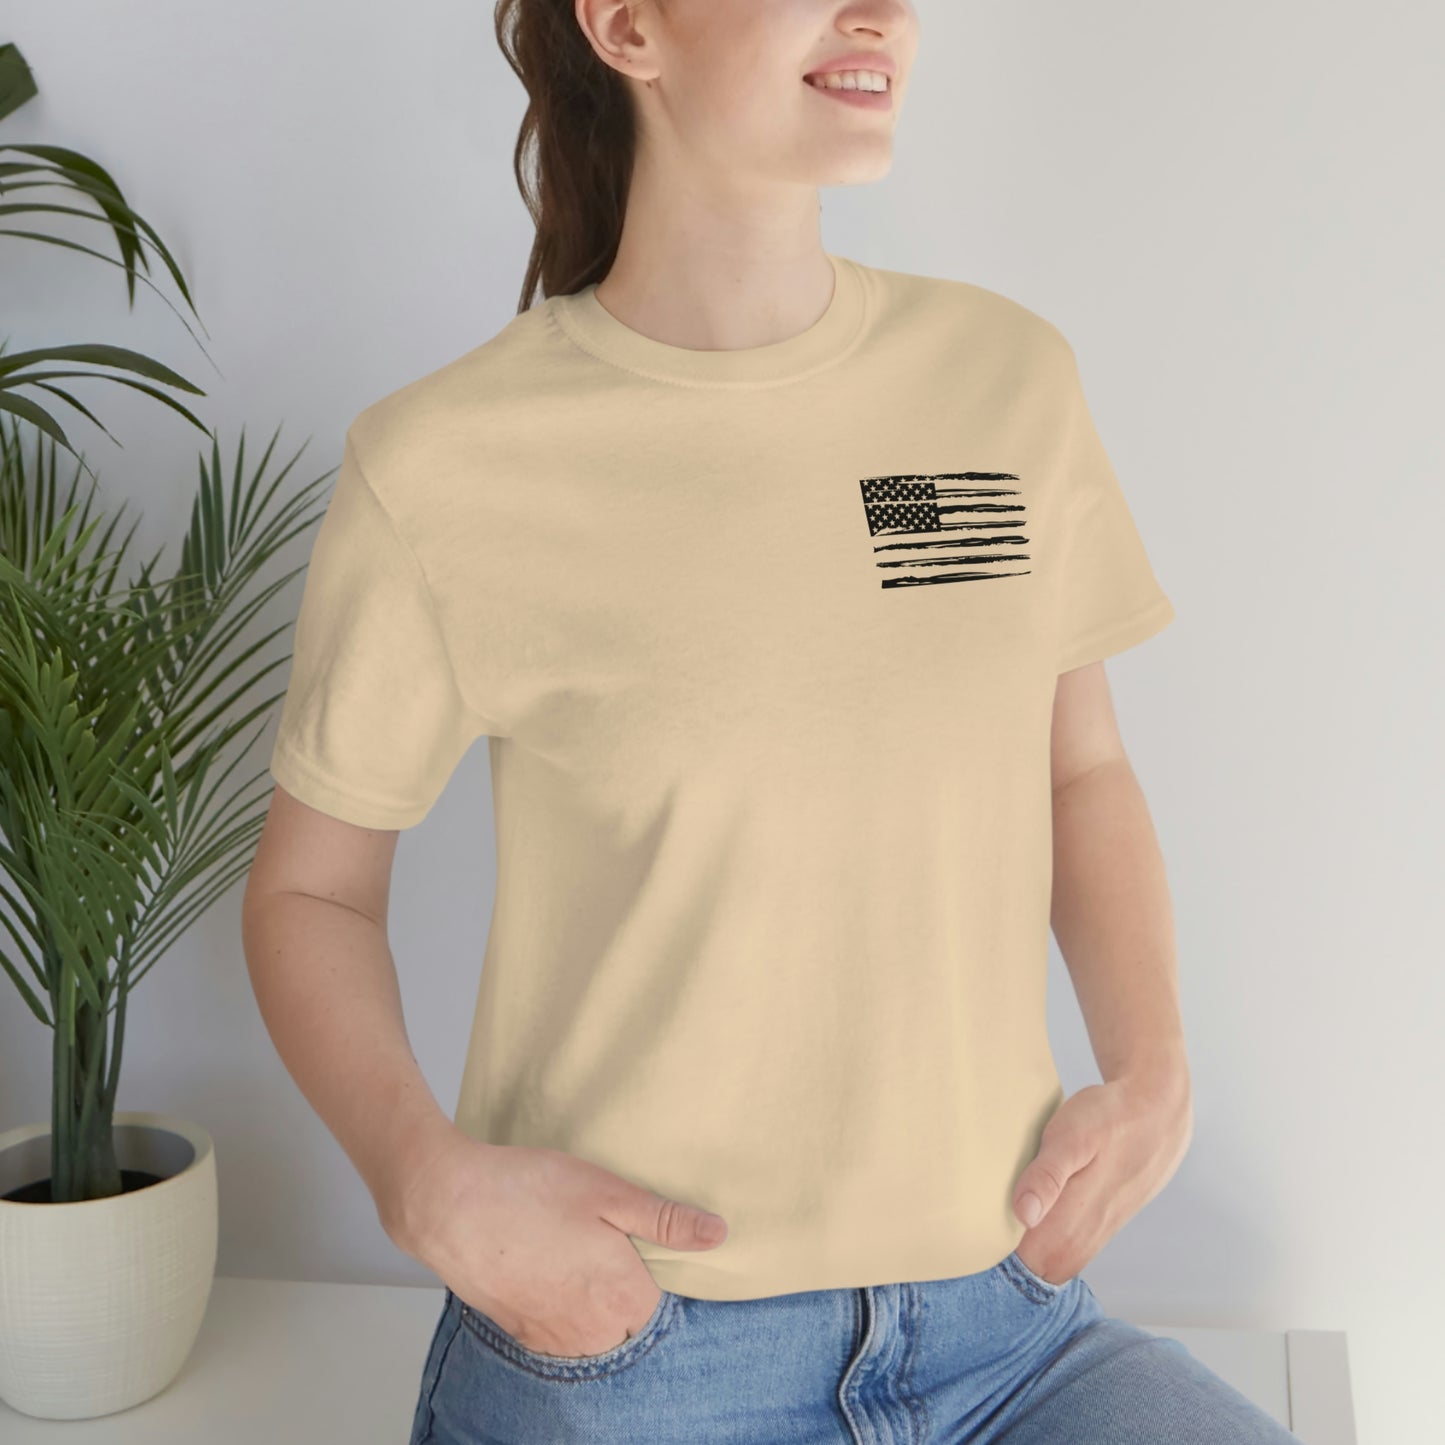 Unisex Jersey Short Sleeve Tee: Preamble to the US Constitution:  America